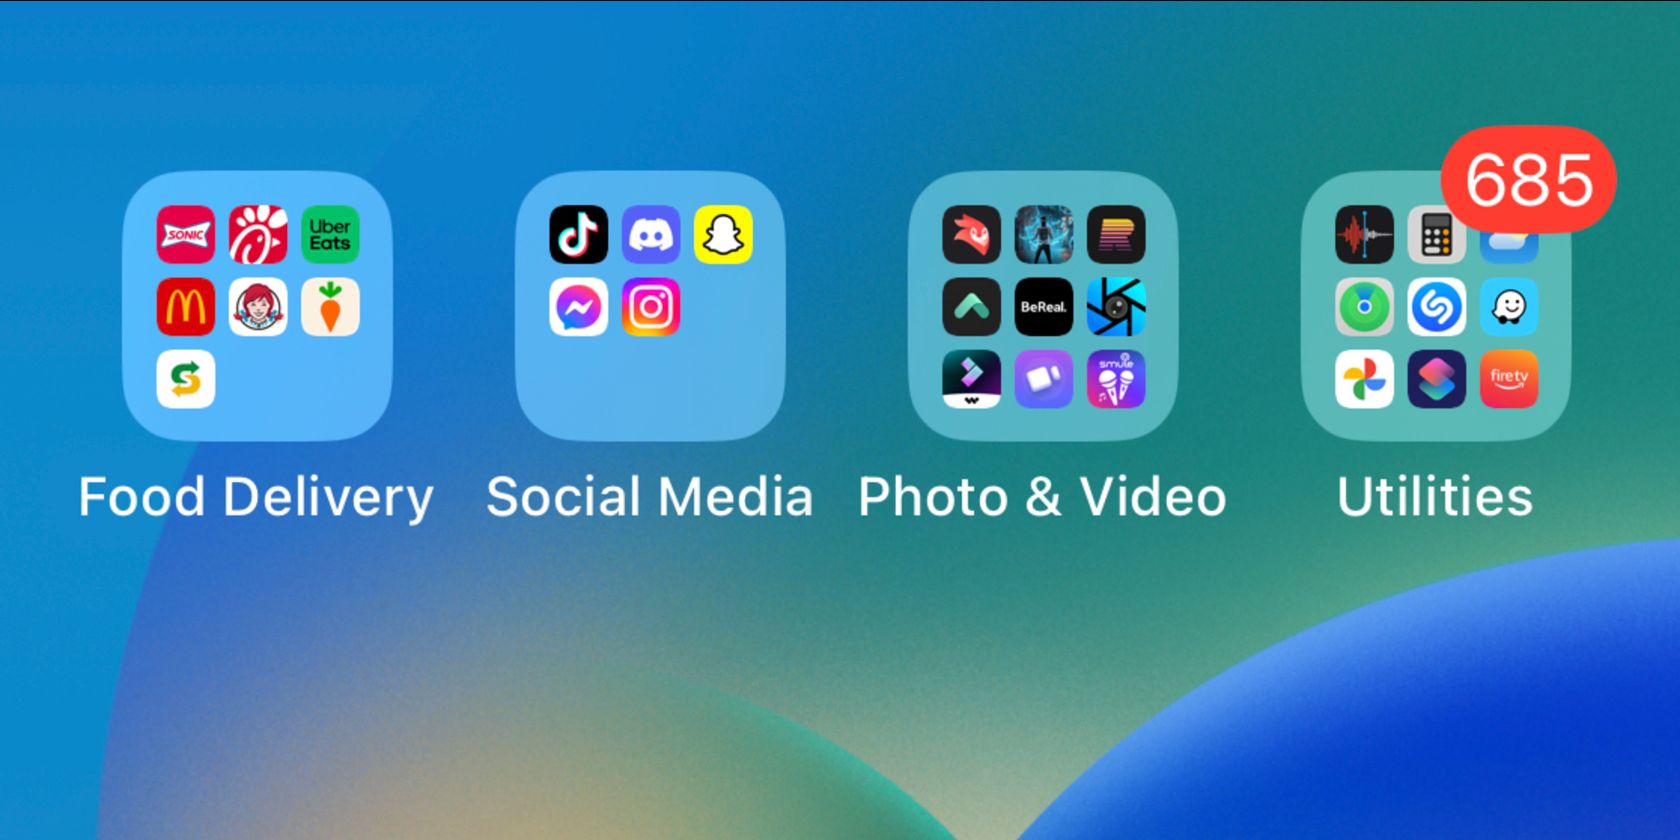 How to Create a Folder on an iPhone to Organize Your Apps